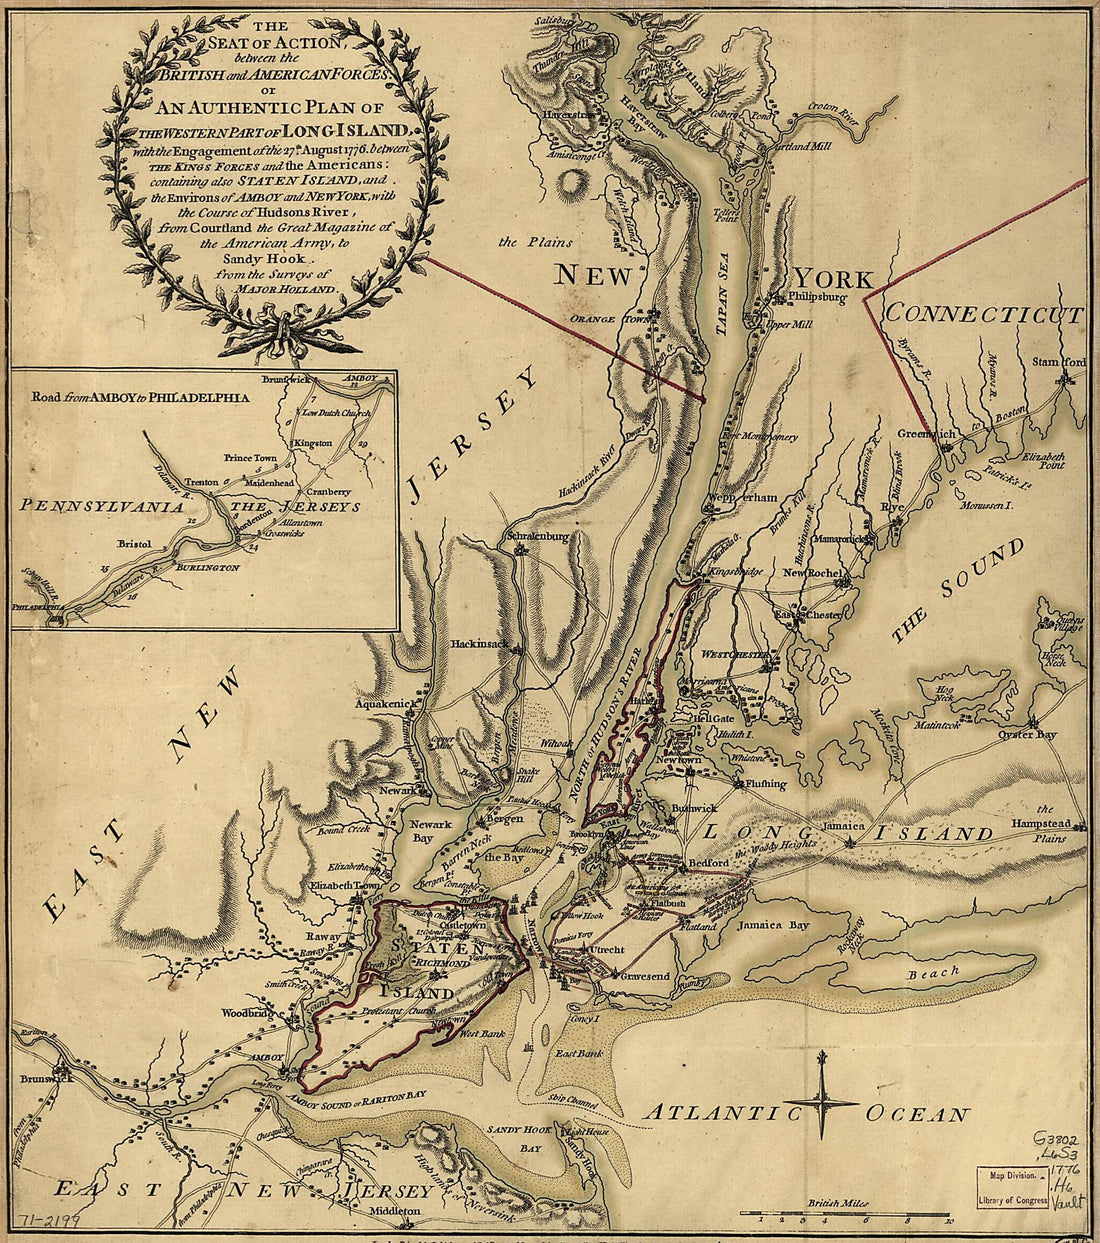 This old map of The Seat of Action, Between the British and American Forces; Or, an Authentic Plan of the Western Part of Long Island, With the Engagement of the 27th August from 1776 Between the King&